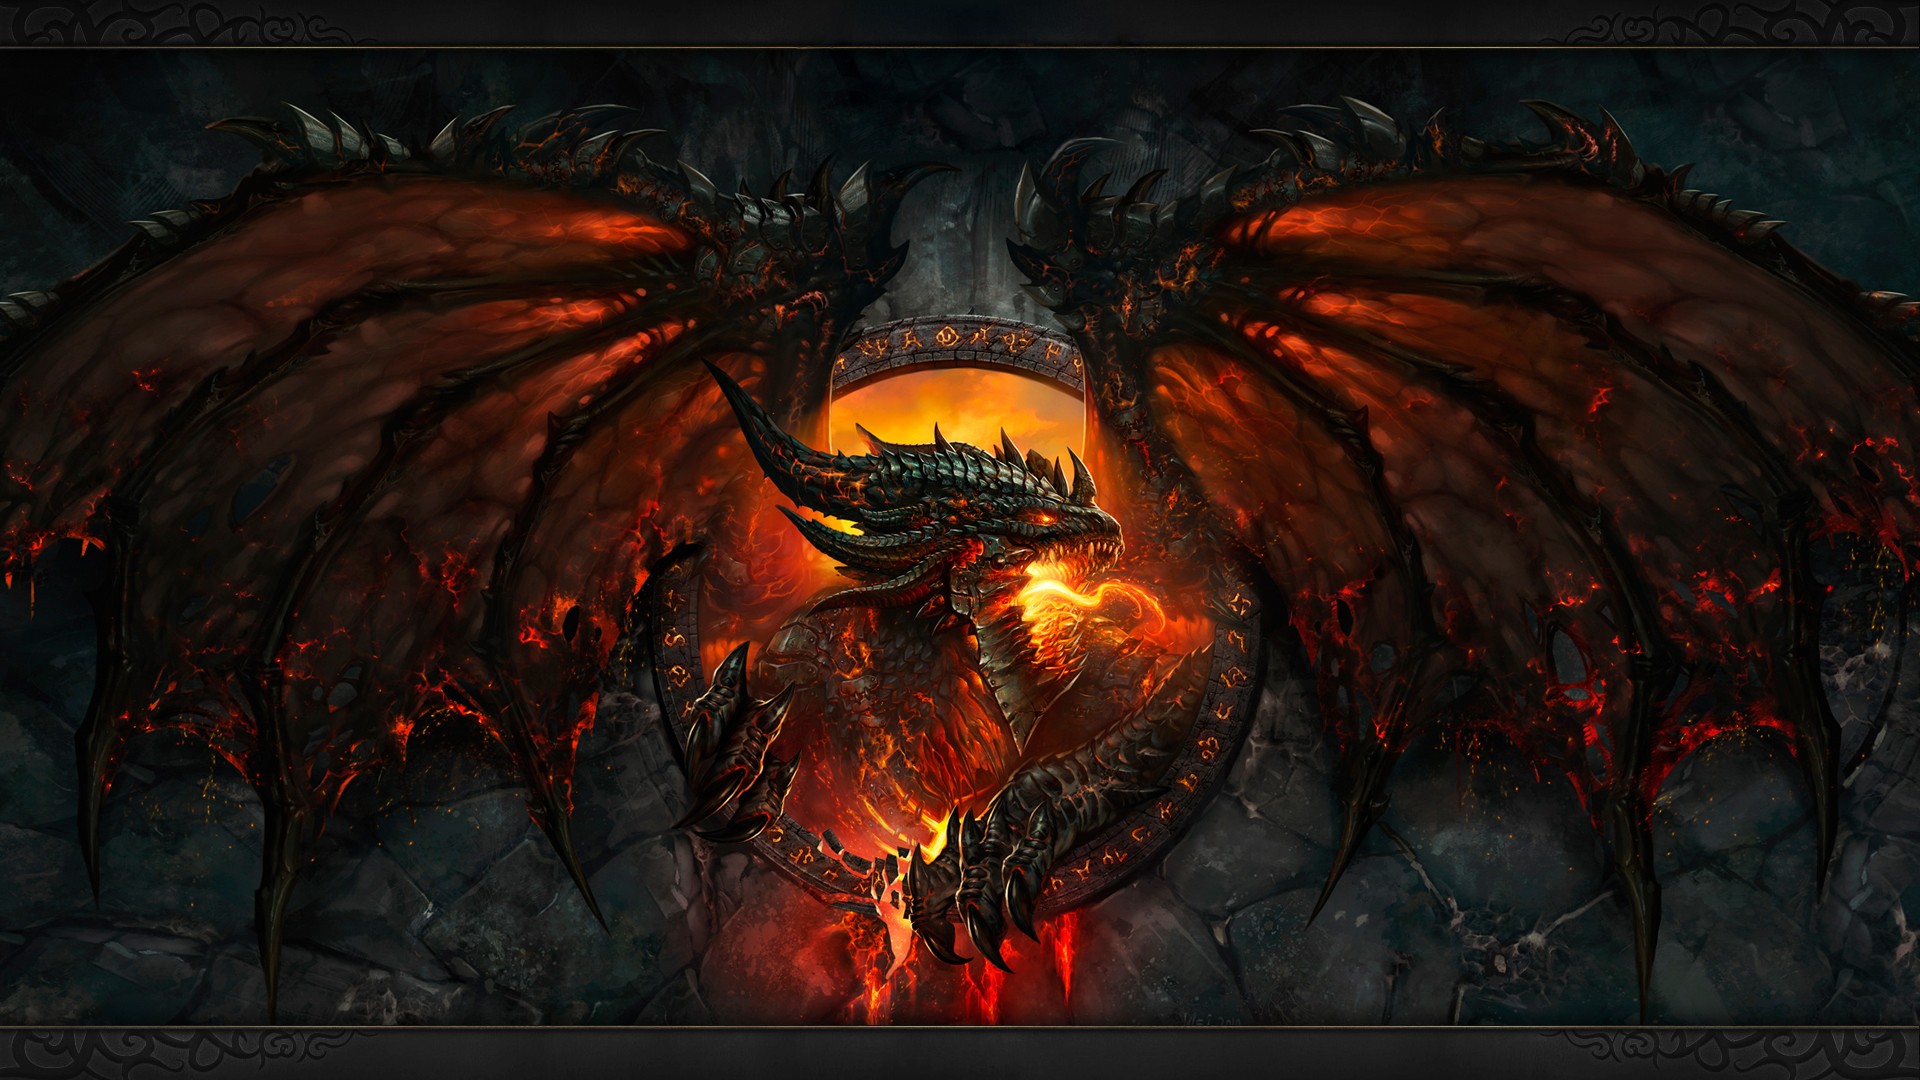 General 1920x1080 World of Warcraft: Cataclysm video games dragon Deathwing World of Warcraft Blizzard Entertainment fire dragon wings wings claws fantasy art face teeth PC gaming video game art artwork creature glowing eyes